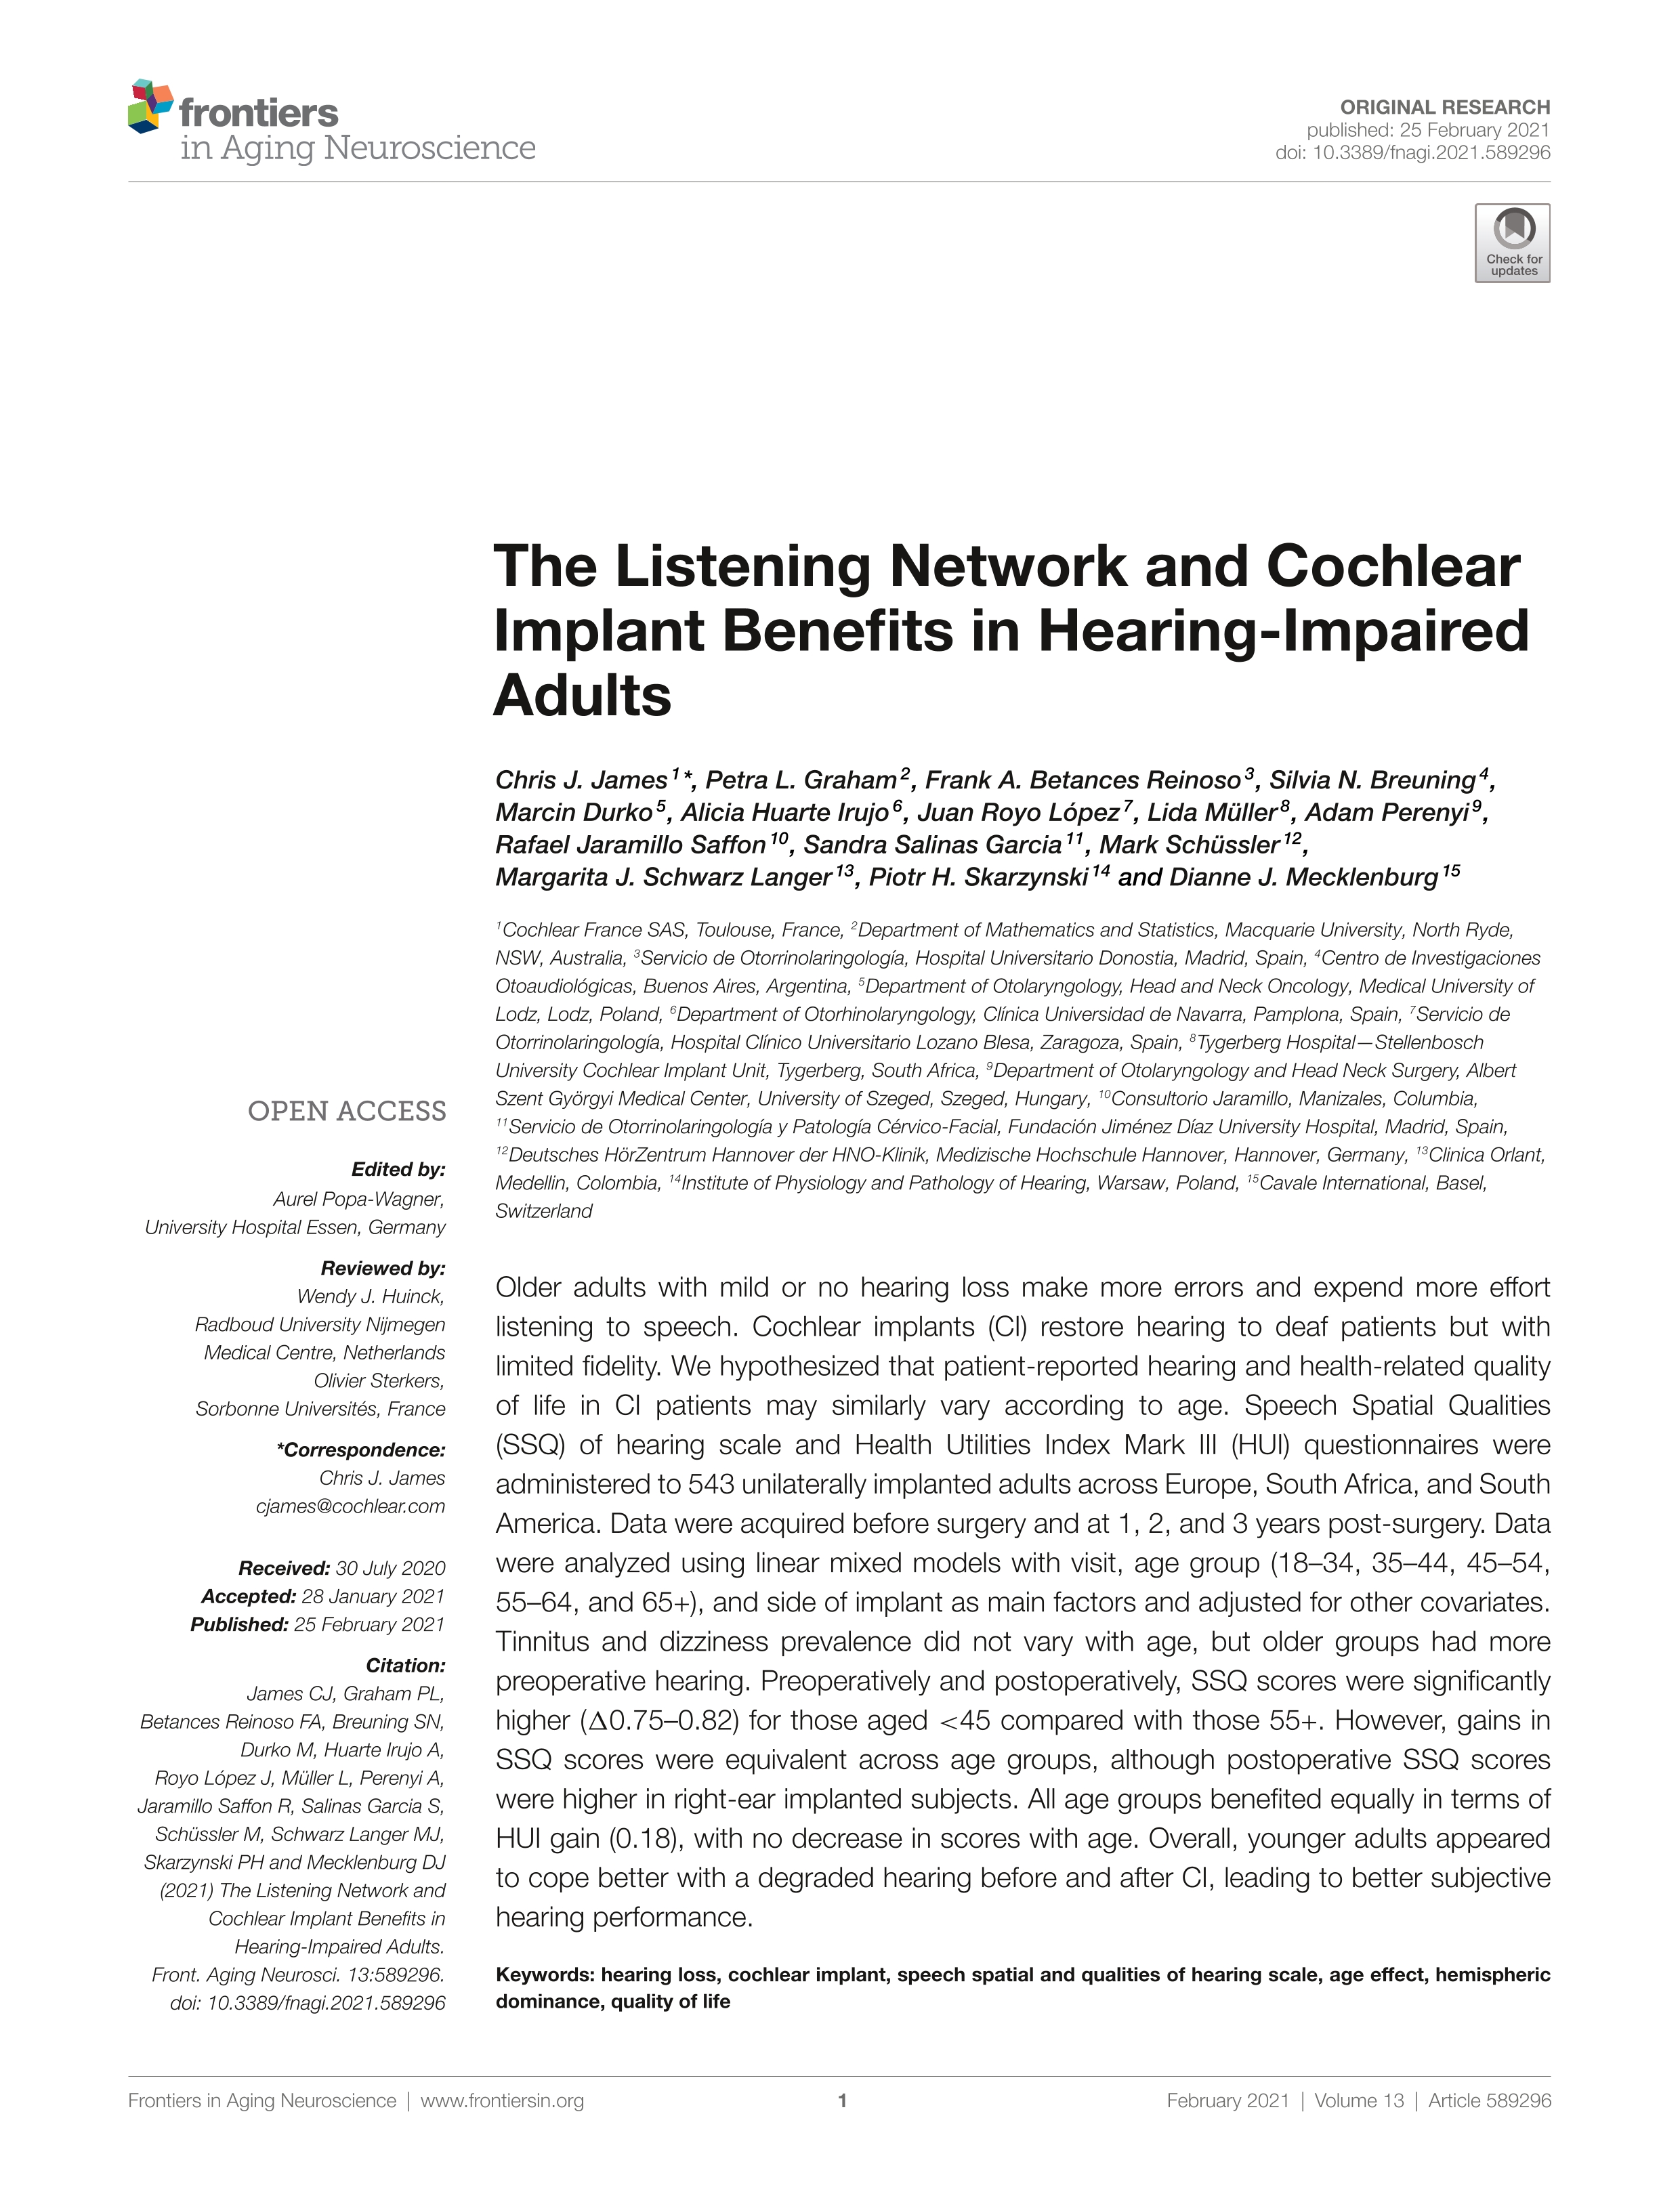 The Listening Network and Cochlear Implant Benefits in Hearing-Impaired Adults